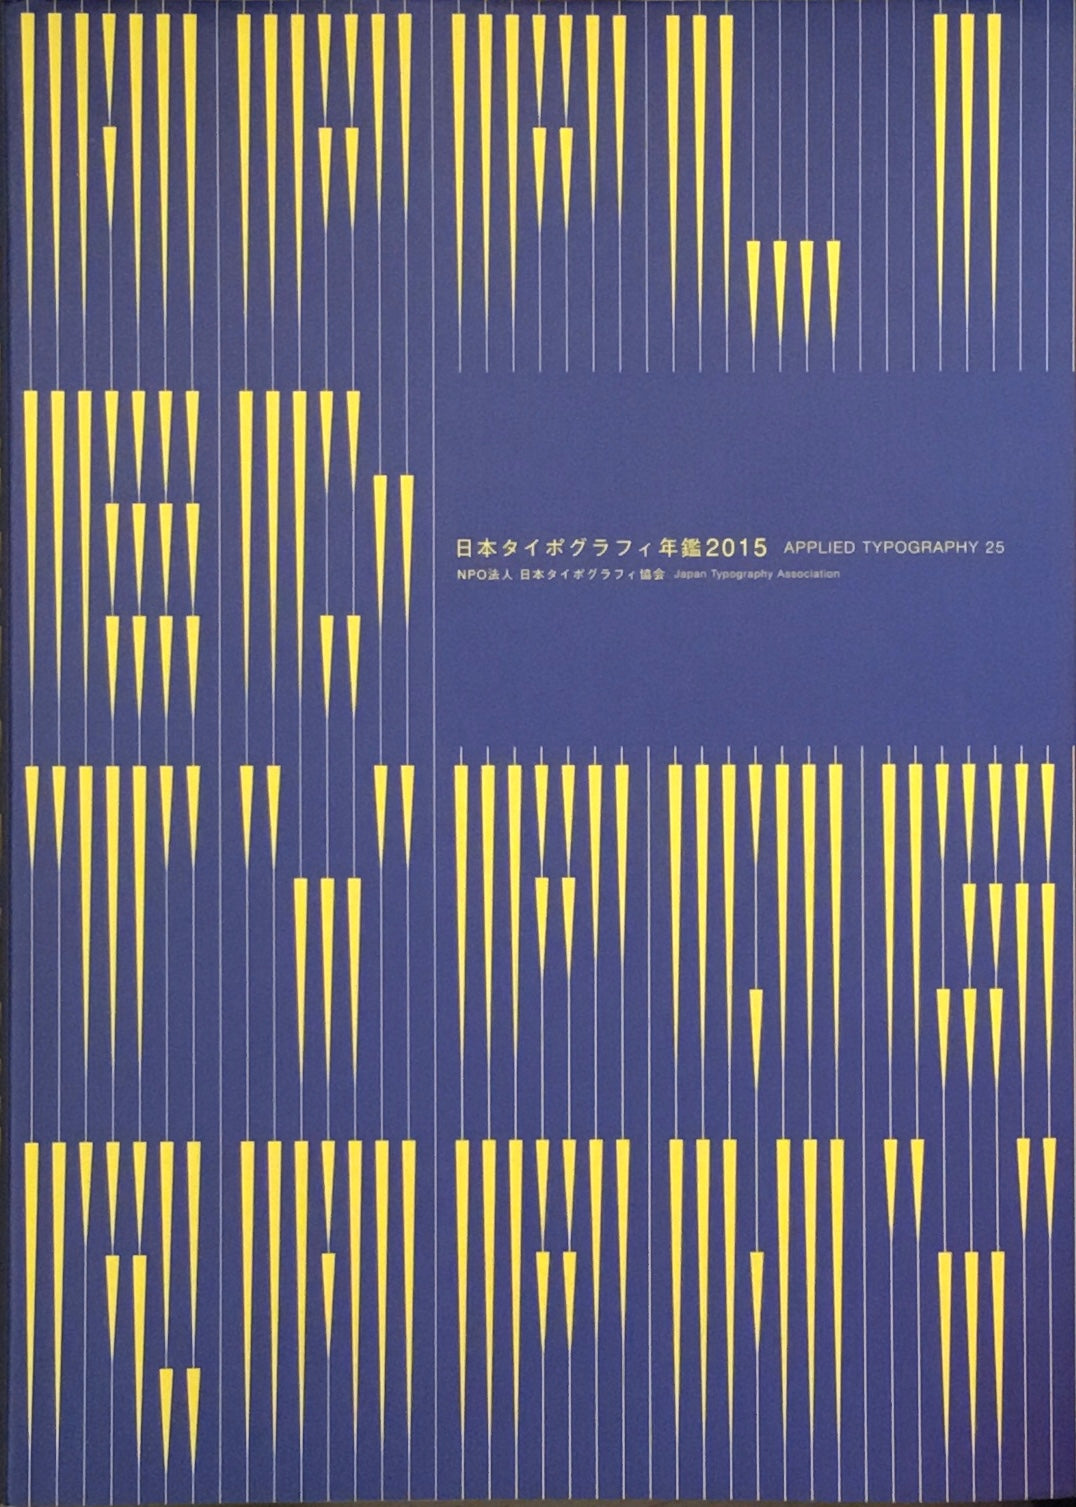 APPLIED　smokebooks　–　TYPOGRAPHY　日本タイポグラフィ年鑑　日本タイポグラフィ協会　shop　2015　25